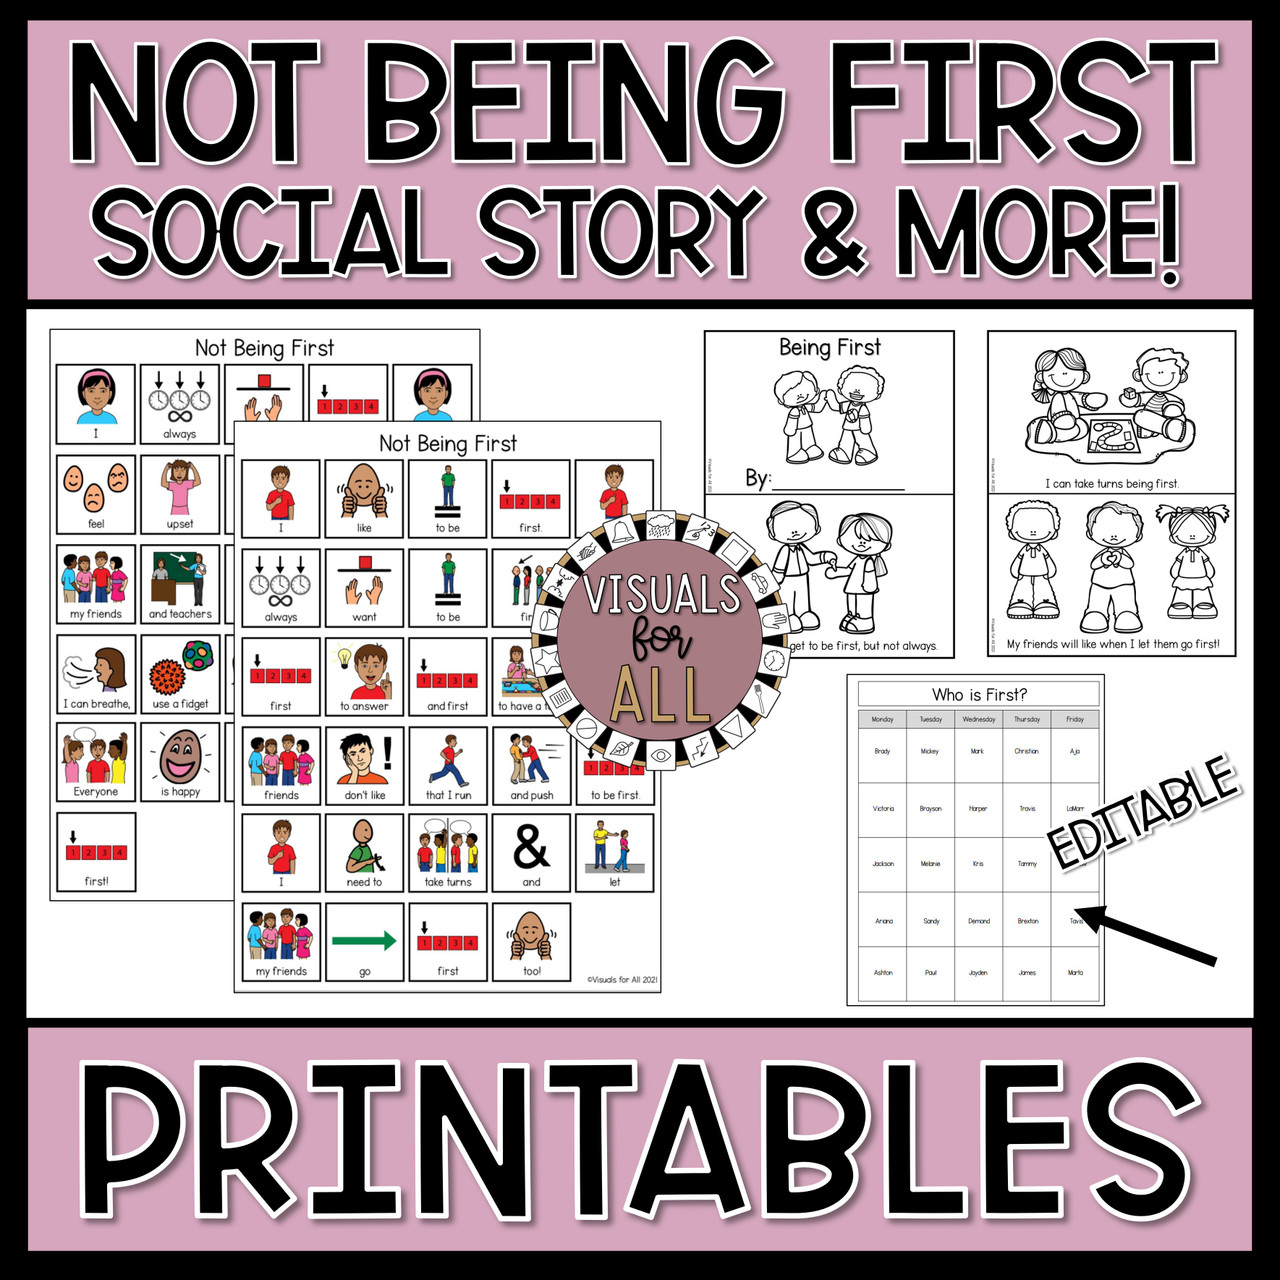 Being First Social Story 